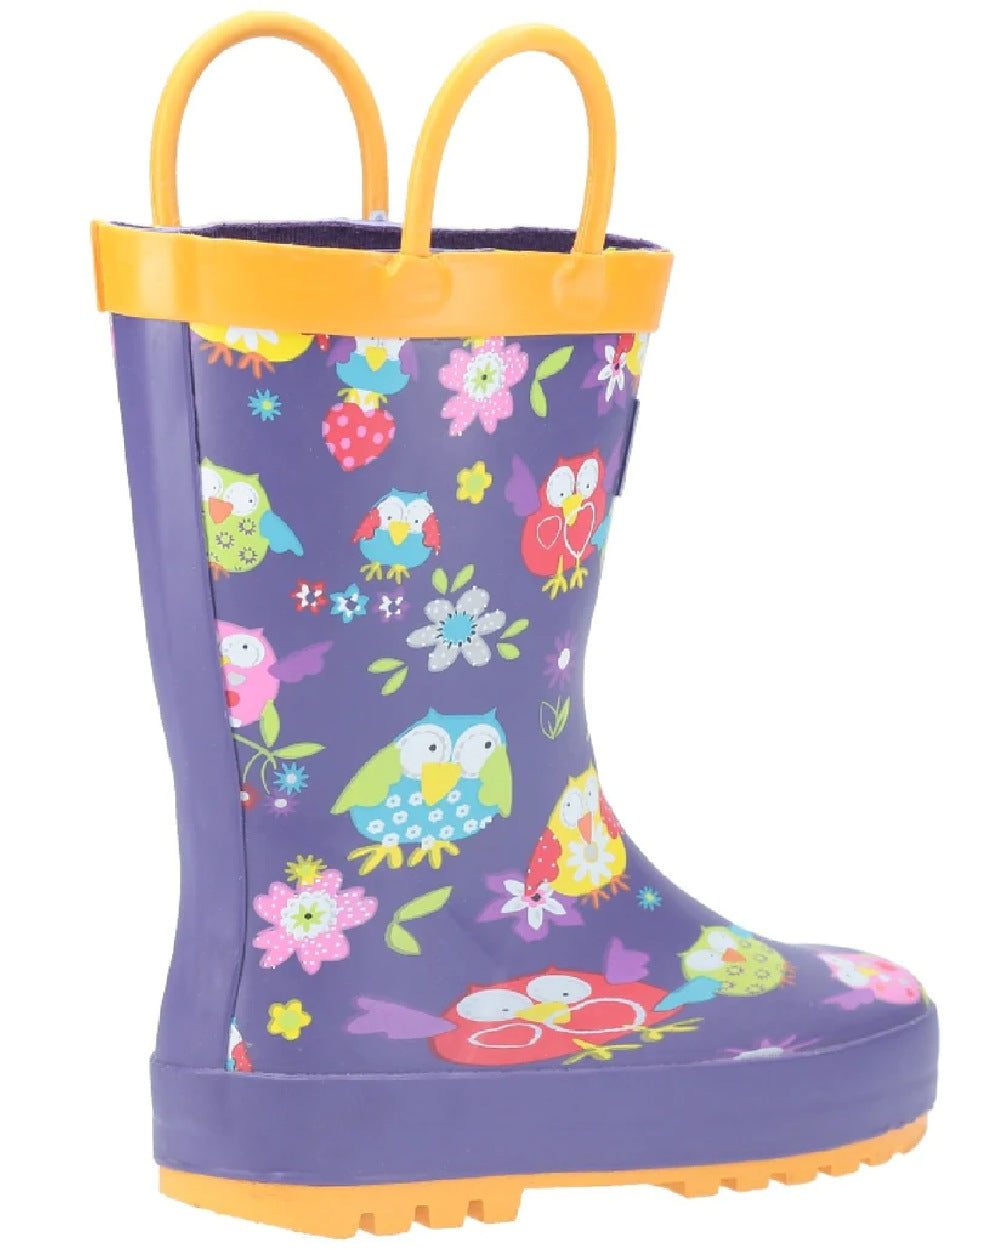 Wotswold Childrens Puddle Waterproof Pull On Boots in Owl 